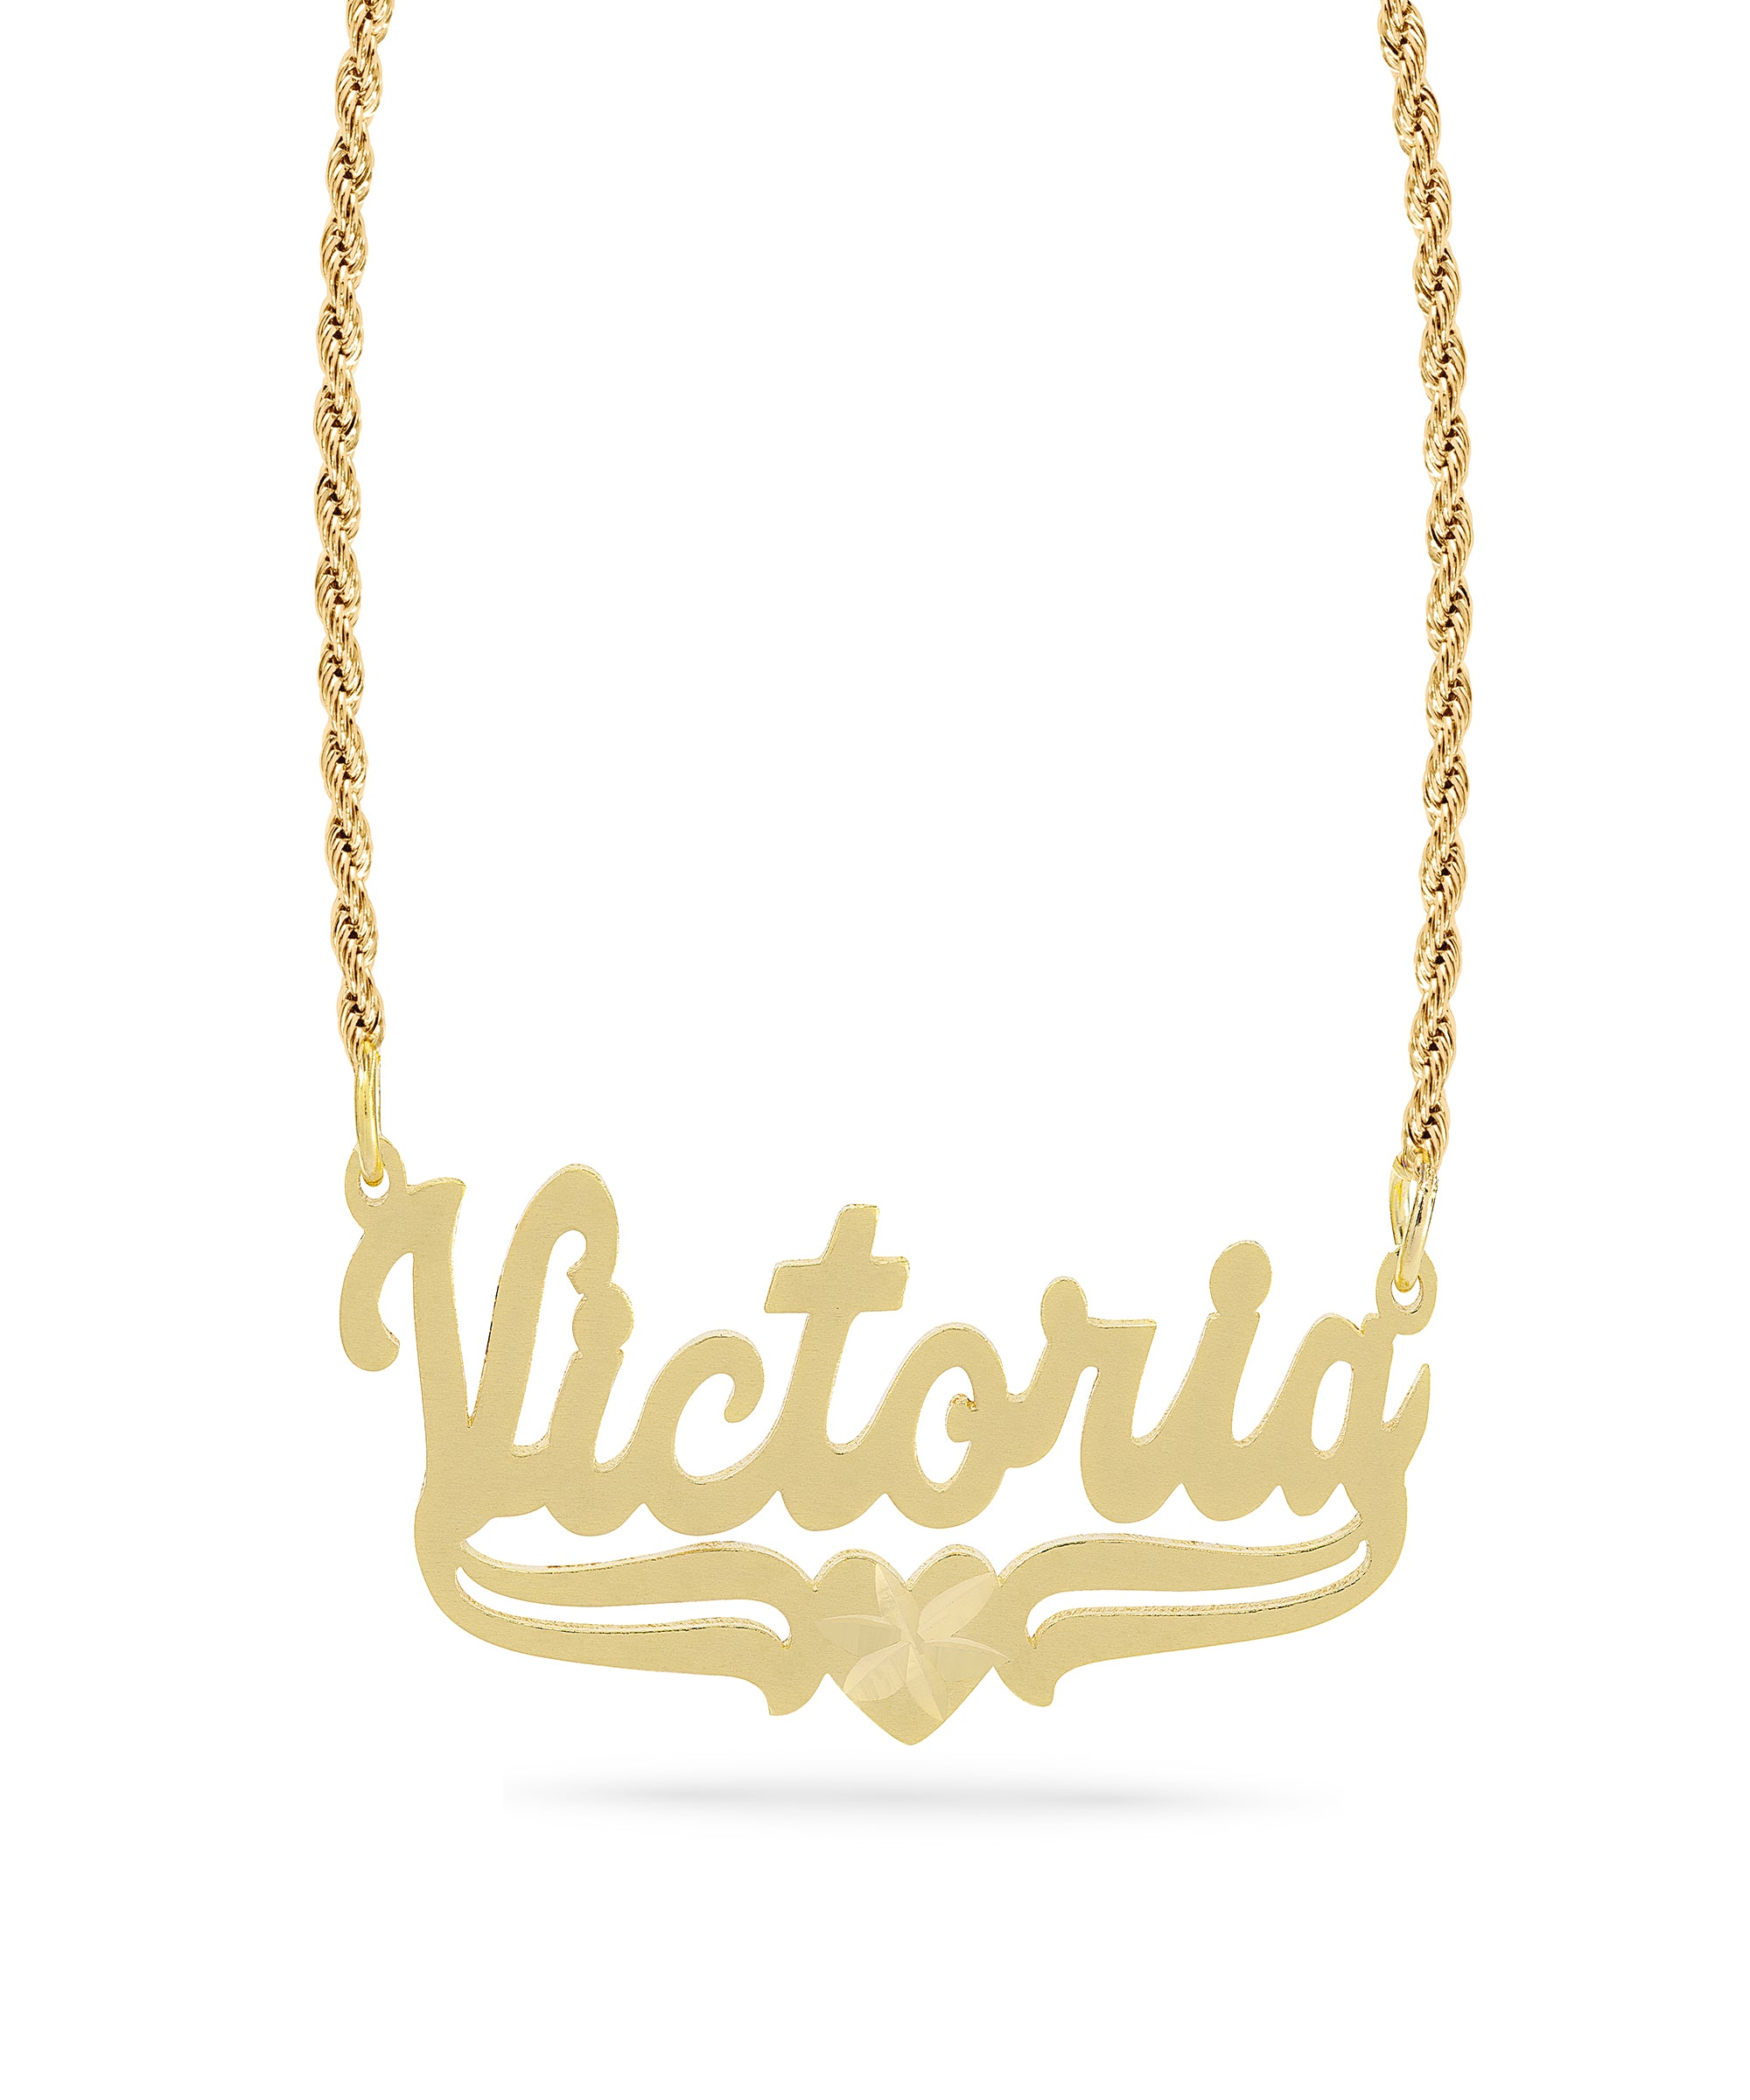 Personalized Name necklace with Satin and Heart "Victoria"